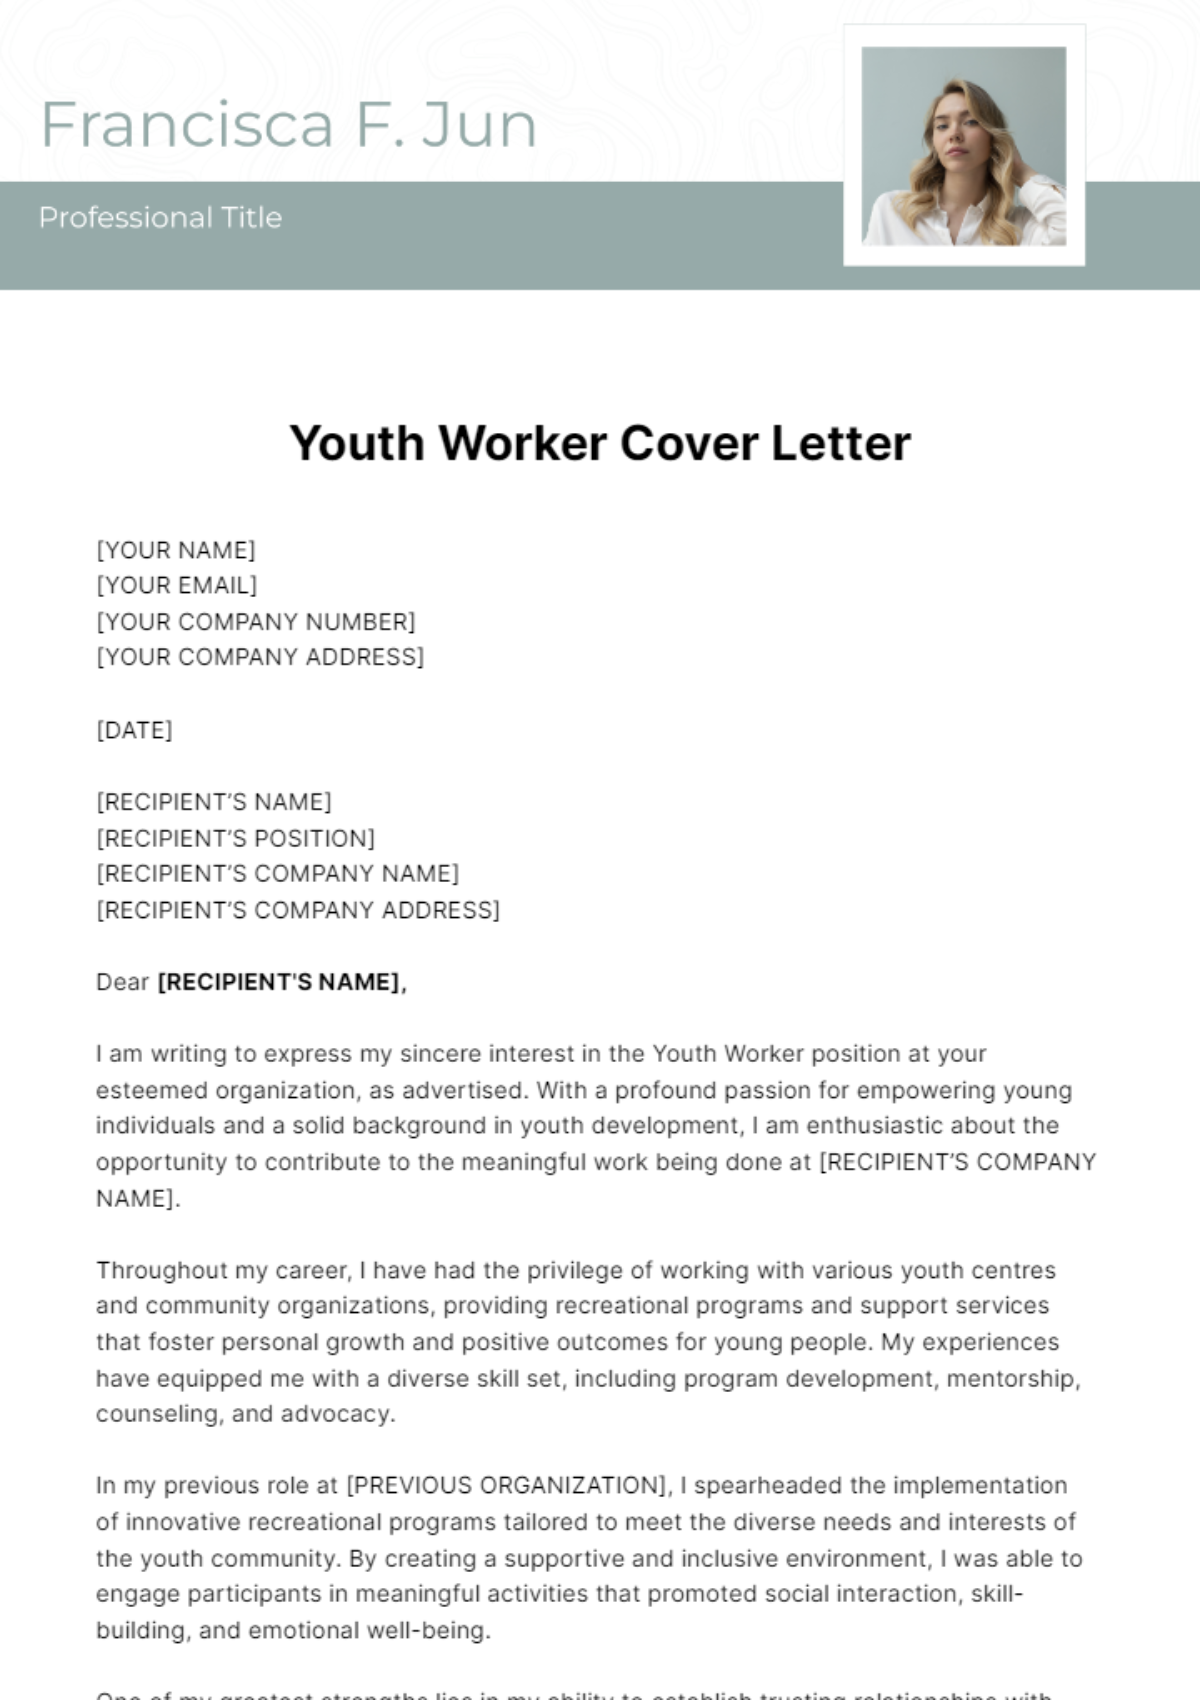 Youth Worker Cover Letter Template